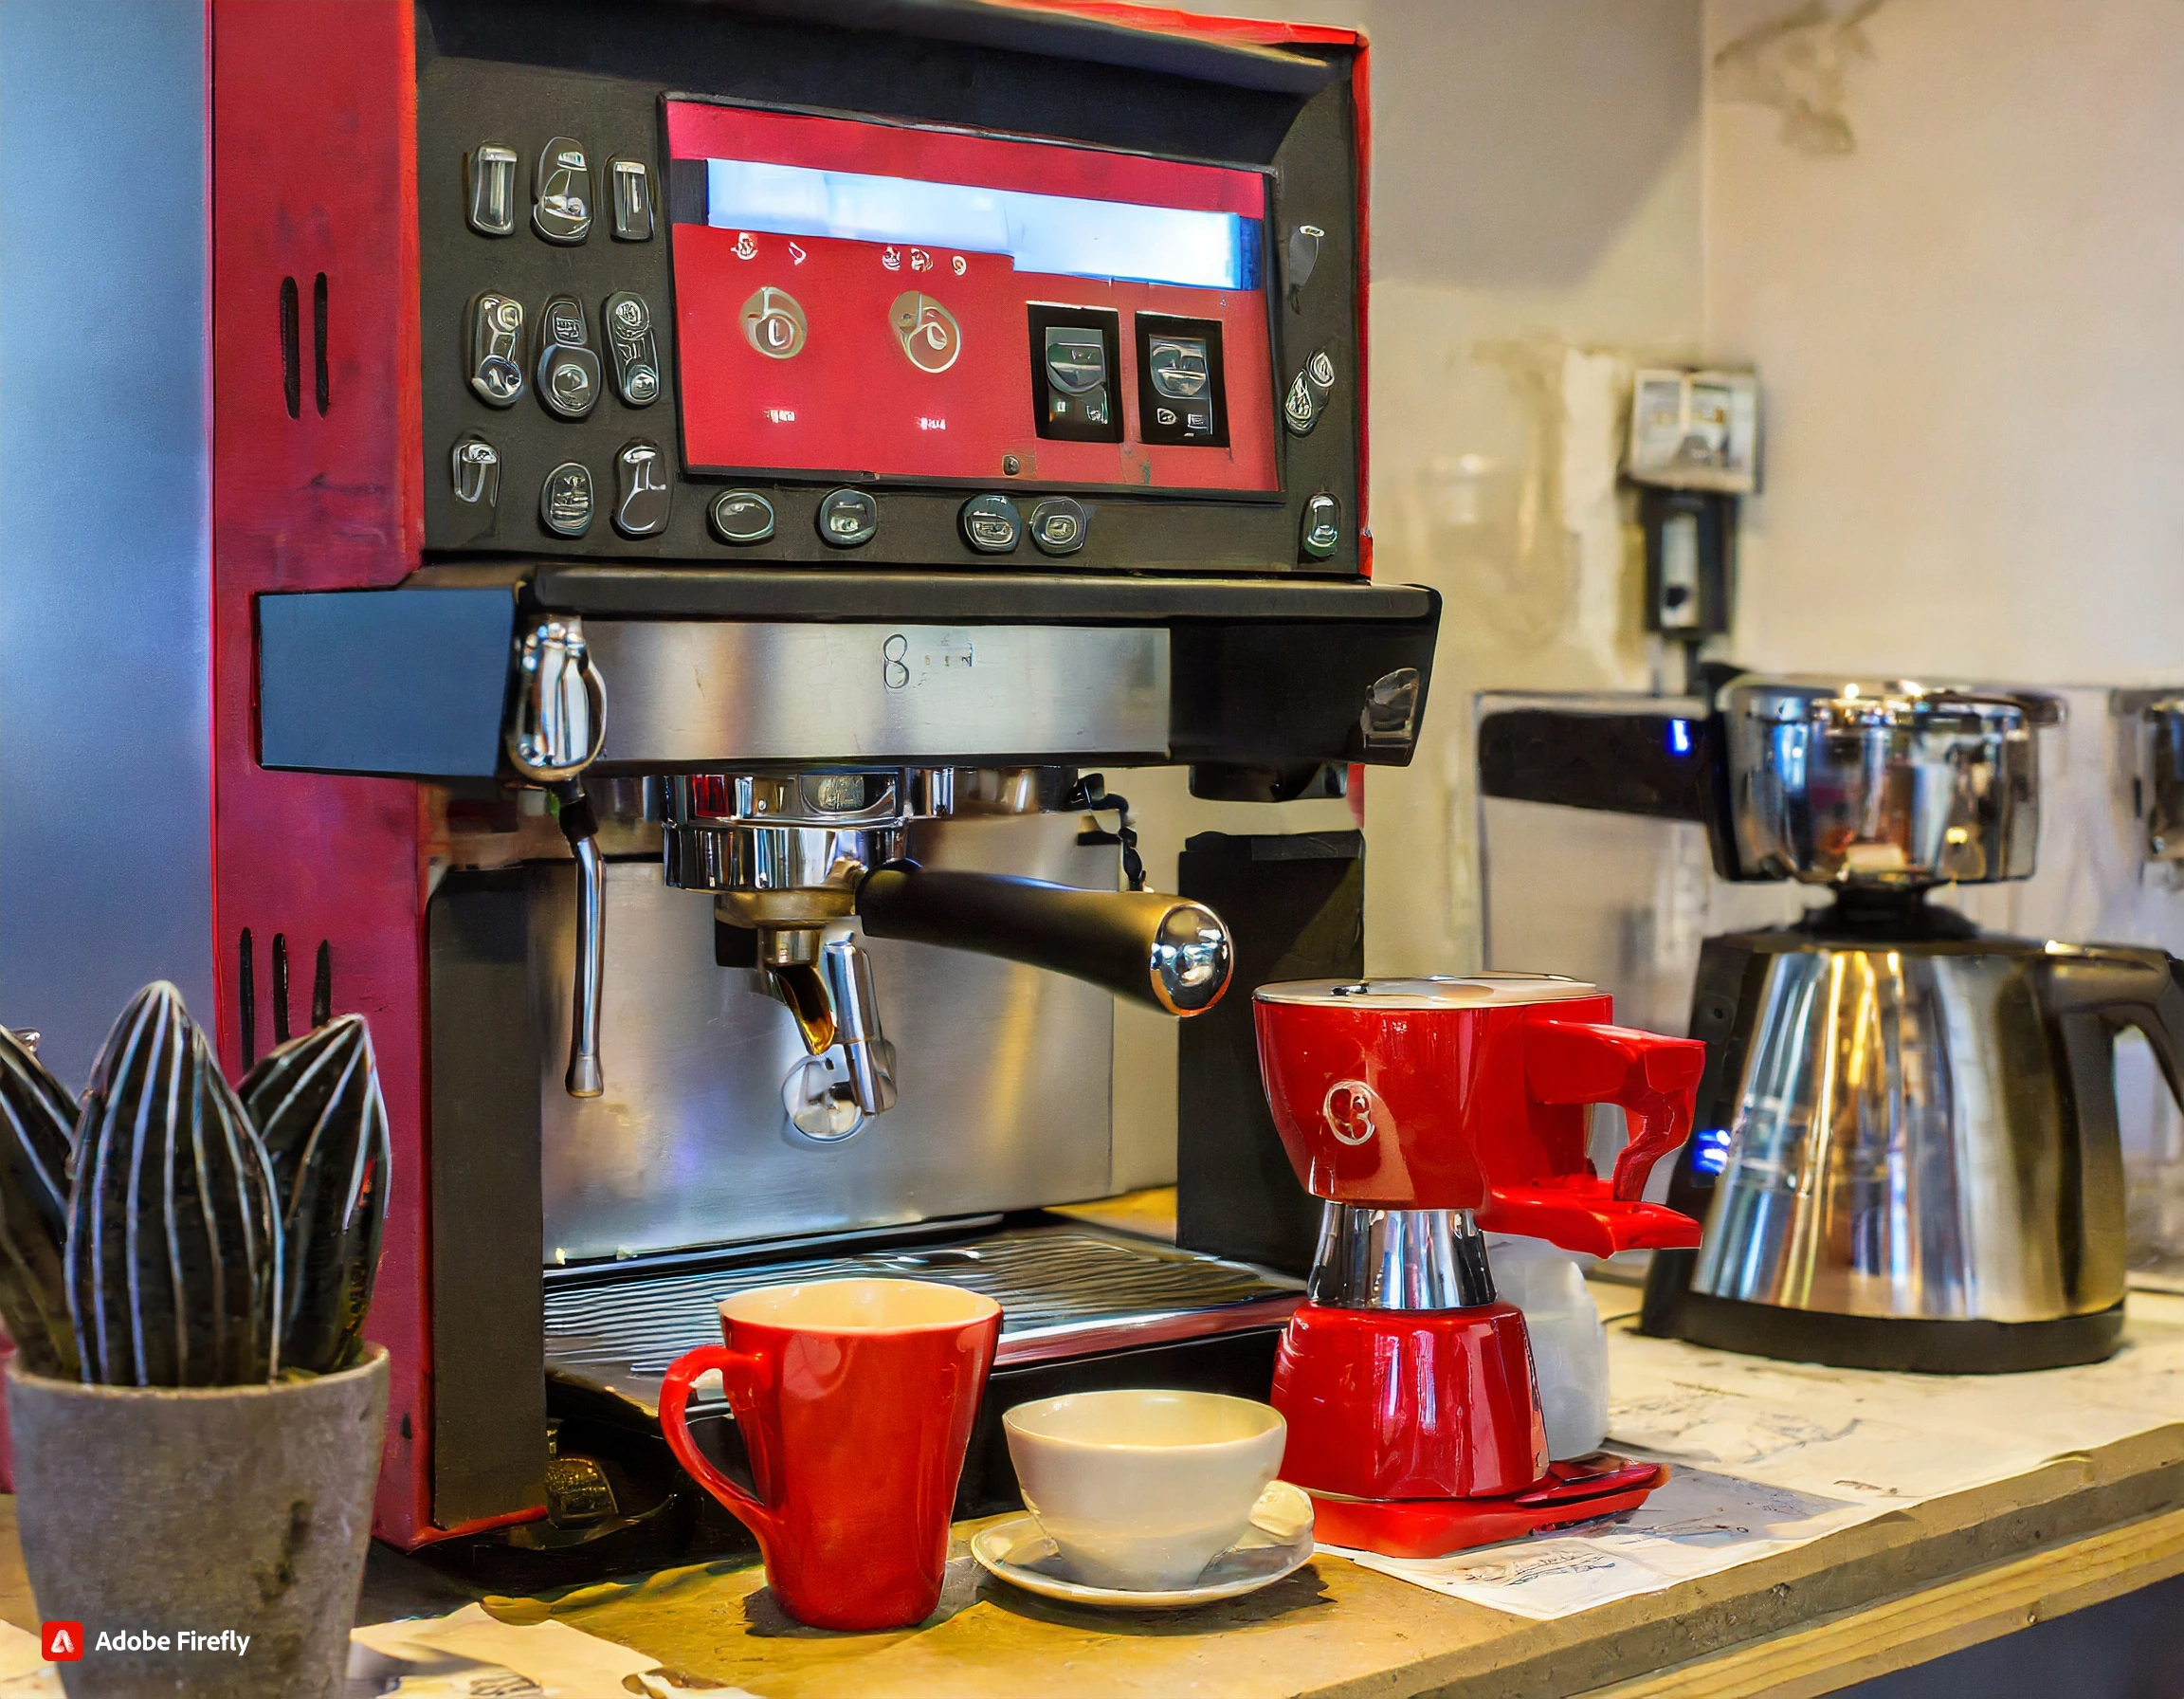 A Step-by-Step Guide: How to Clean Your Breville Espresso Machine